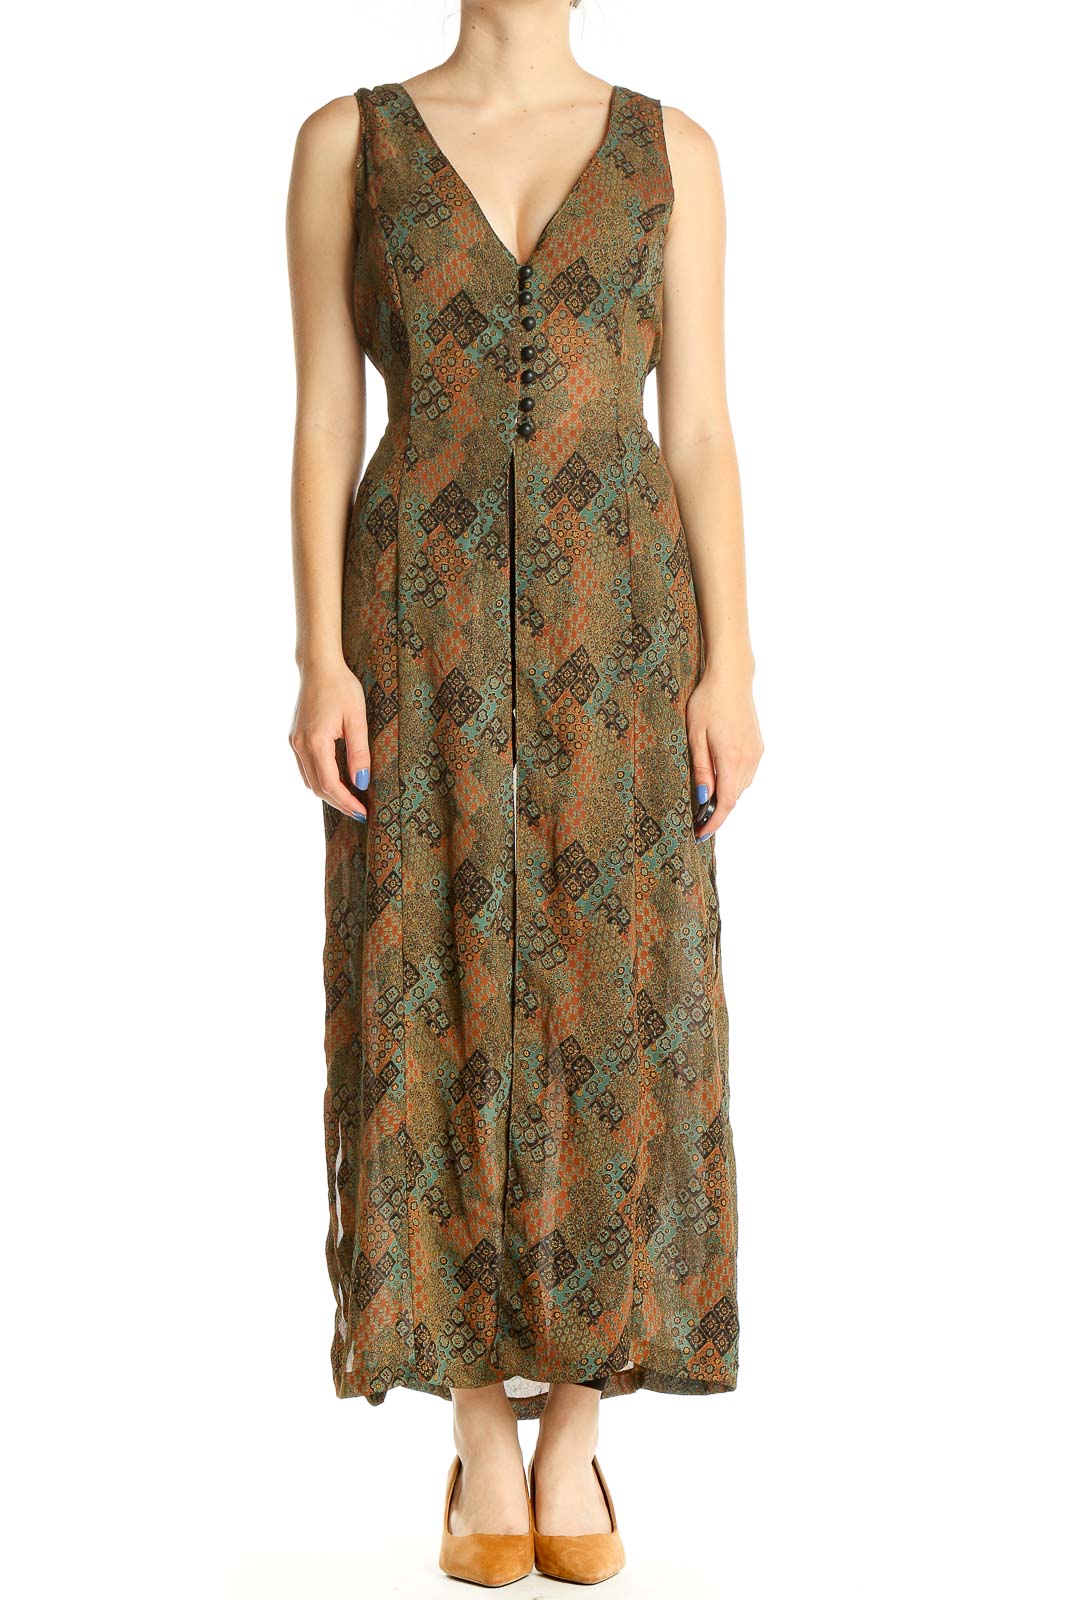 Green Geometric Print Bohemian Long Top With Slits Front